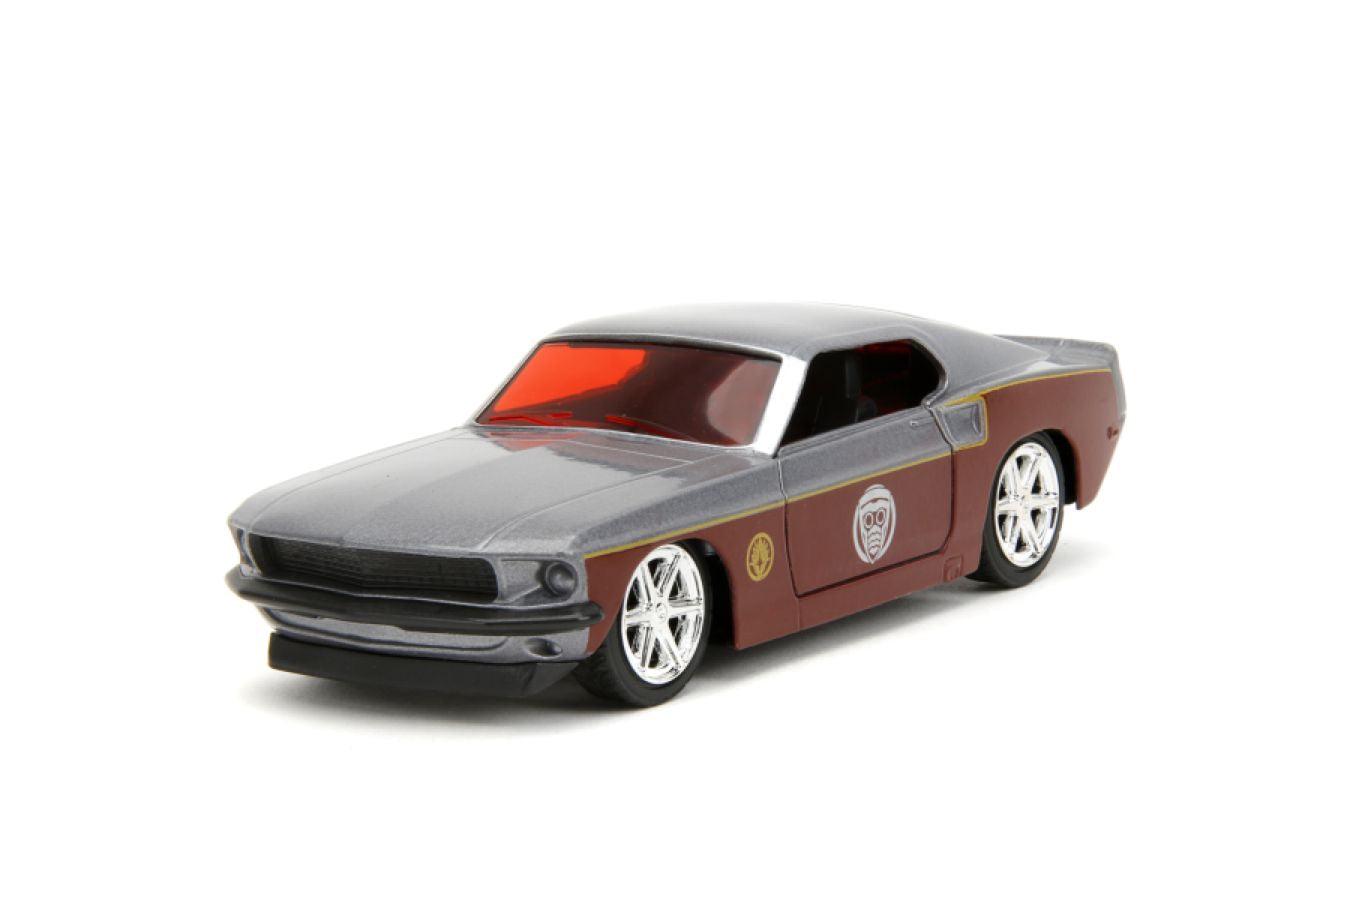 JAD33077 Marvel Comics - 1969 Ford Mustang Fastback 1:32 Scale Vehicle with Star Lord Figure - Jada Toys - Titan Pop Culture